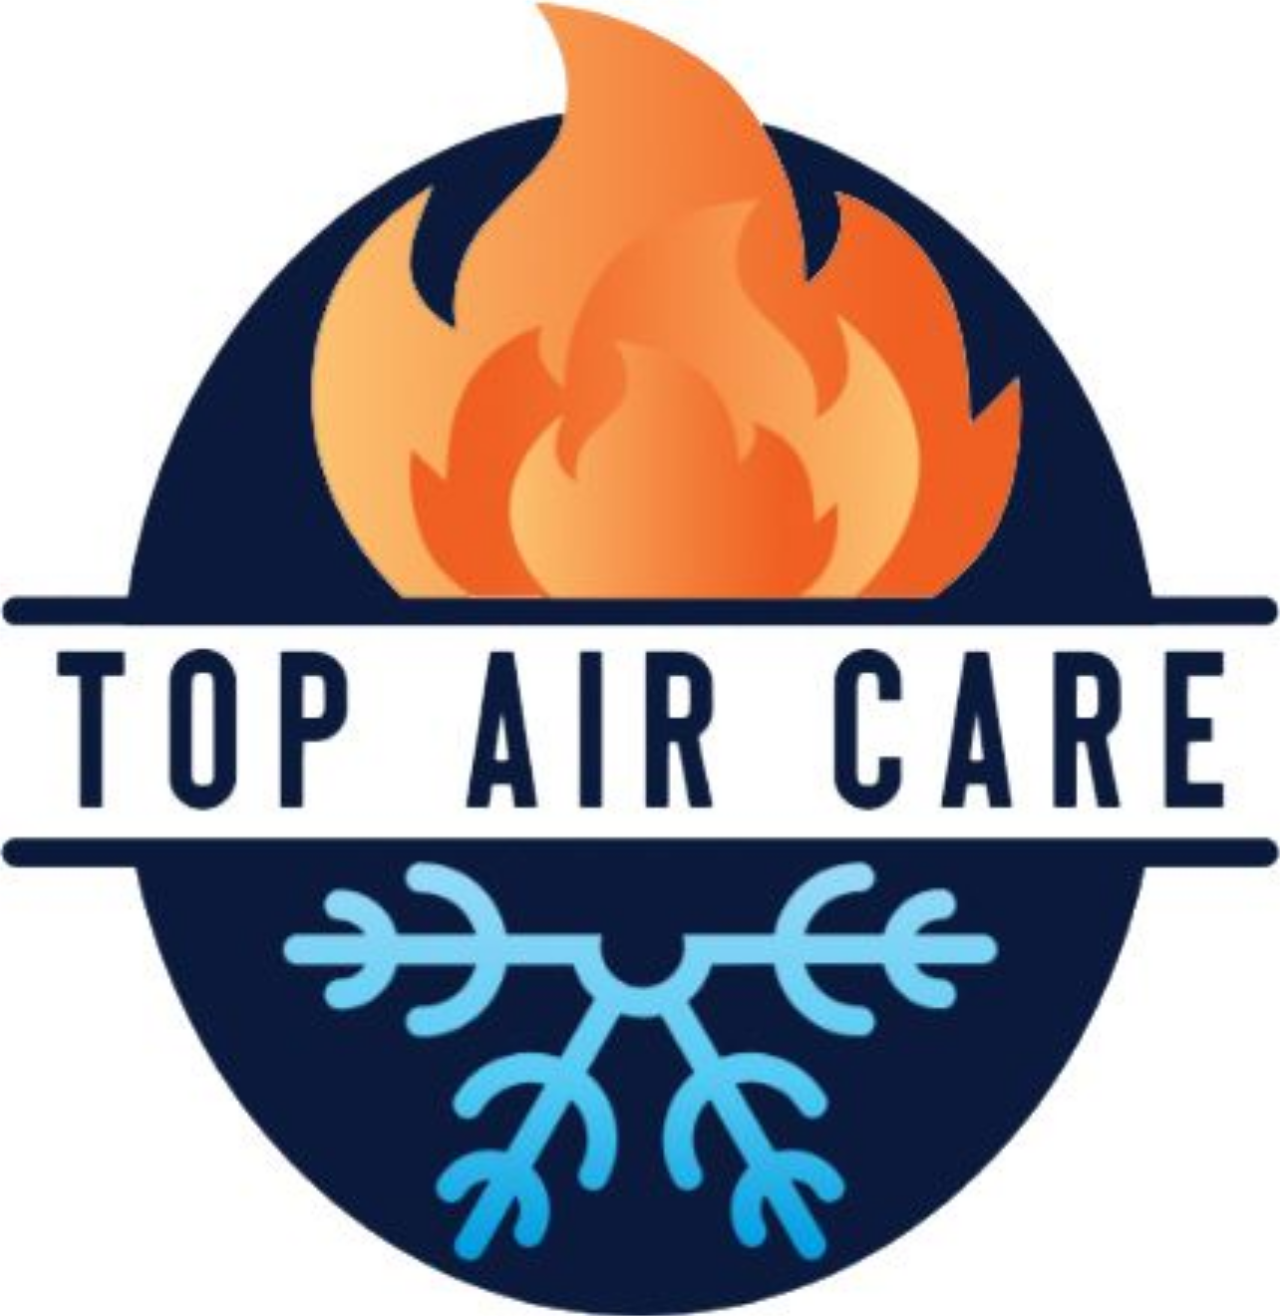 TOP air care air duct cleaning's logo